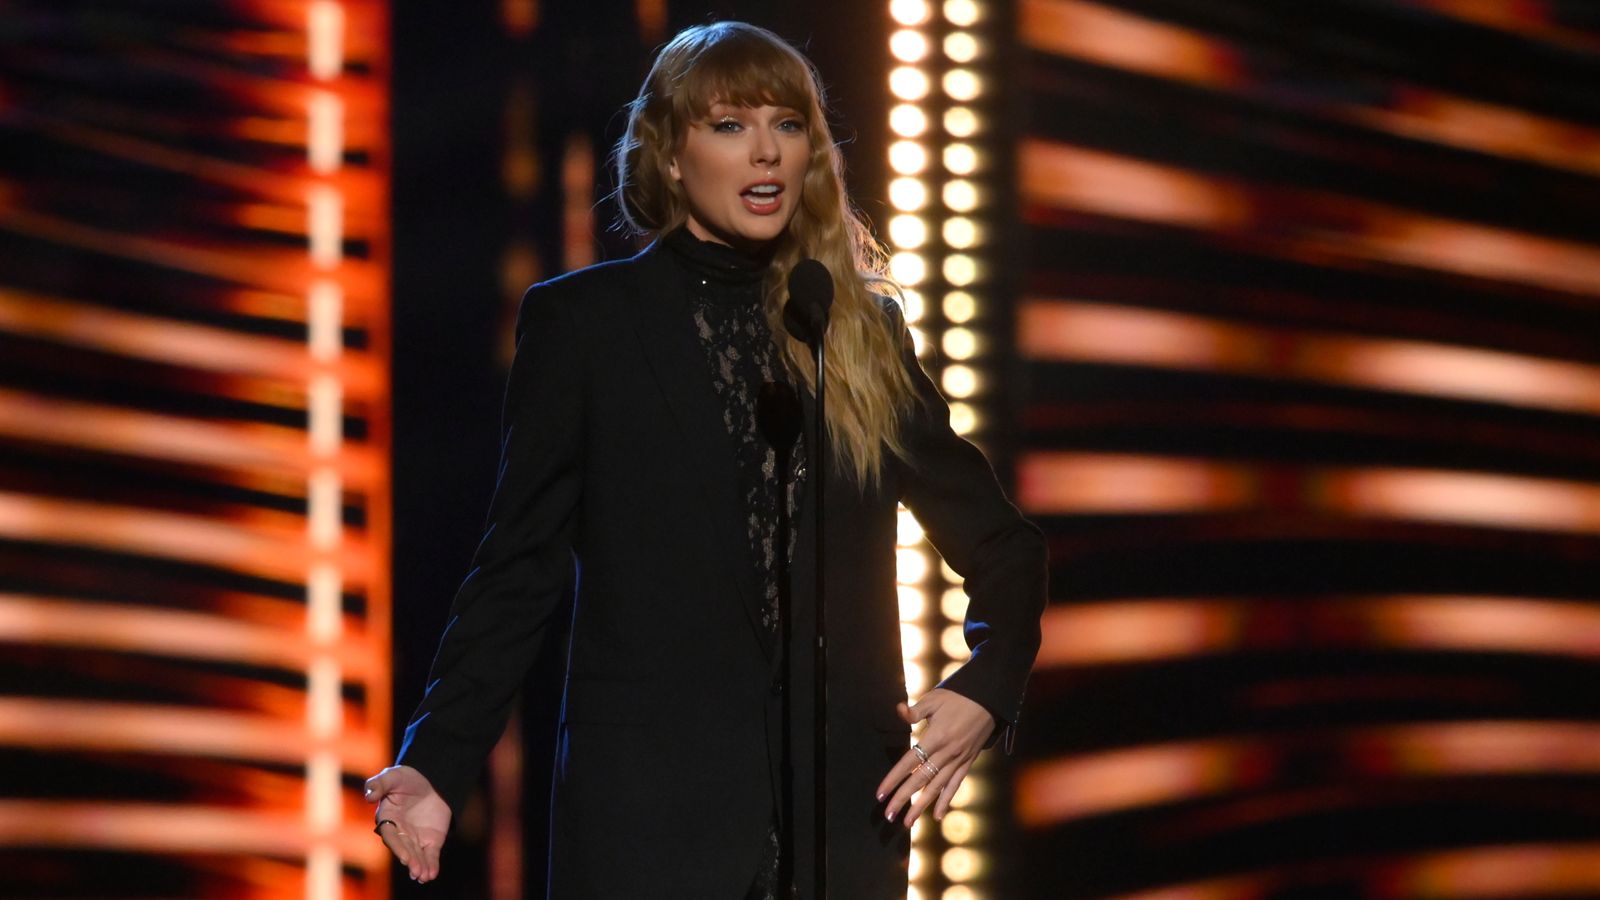 Taylor Swift hits back at Damon Albarn after he claimed she does not write her own songs